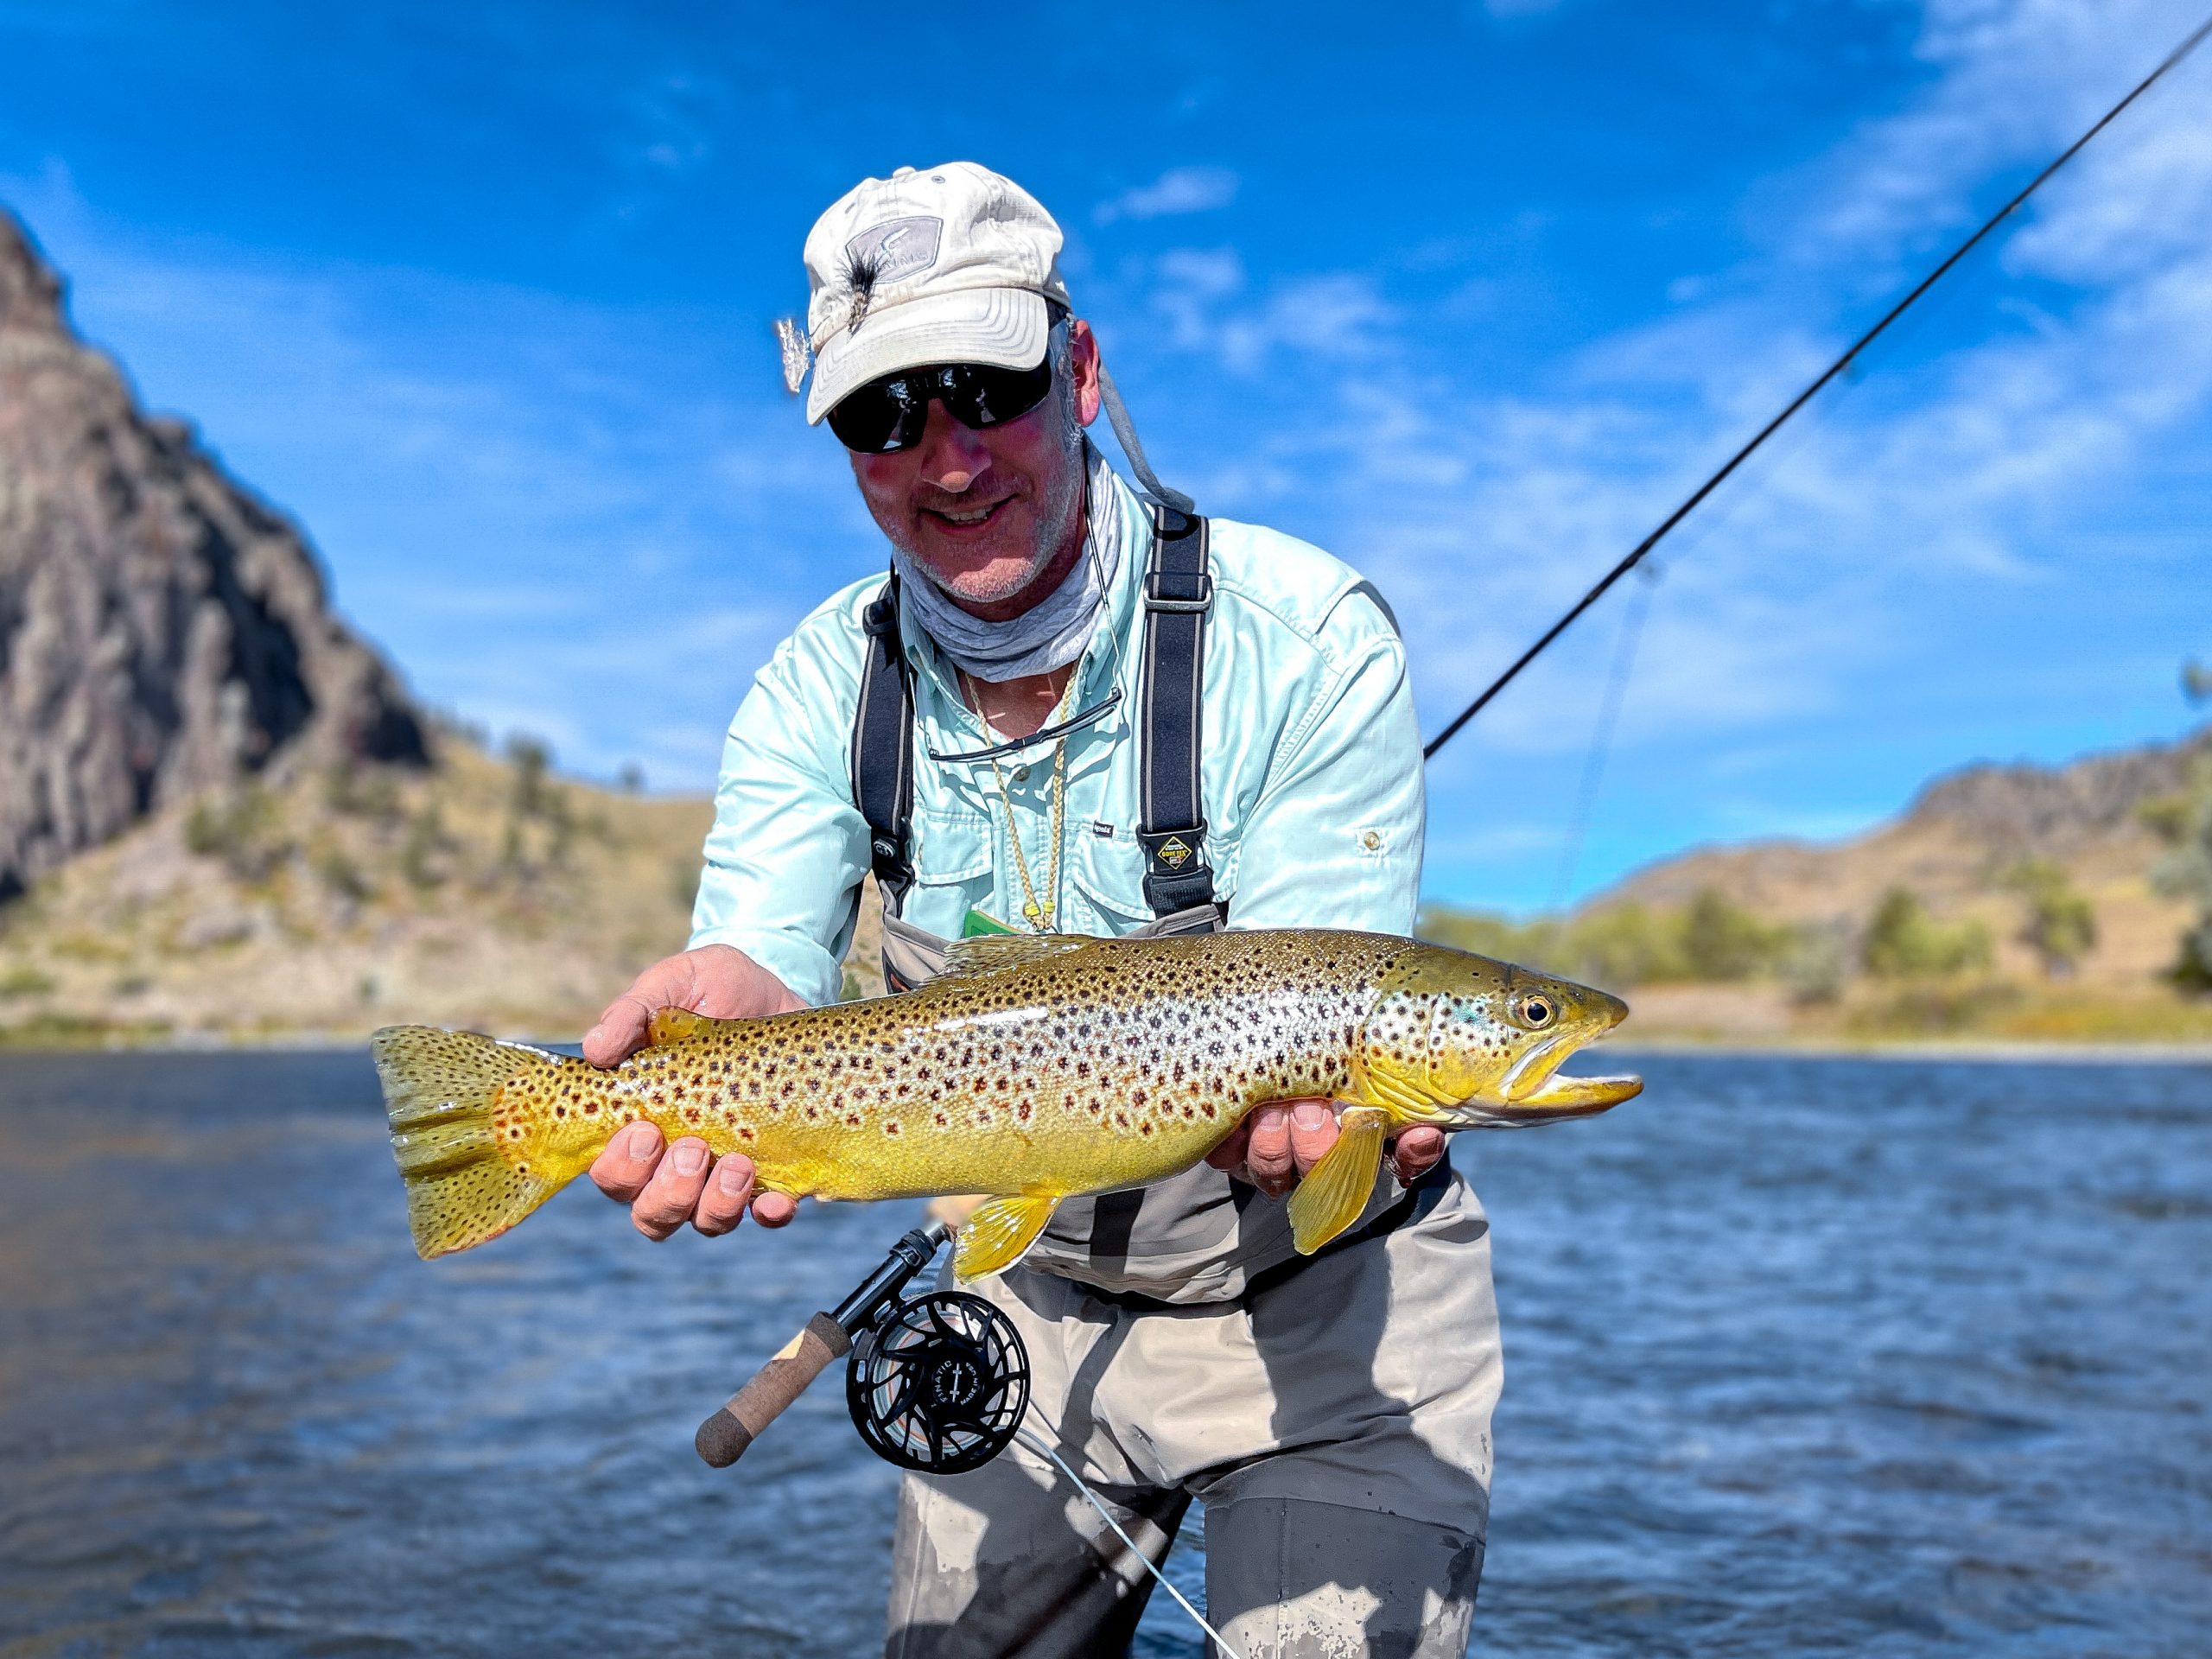 Review of Good gear from Echo Fly rods: 2016